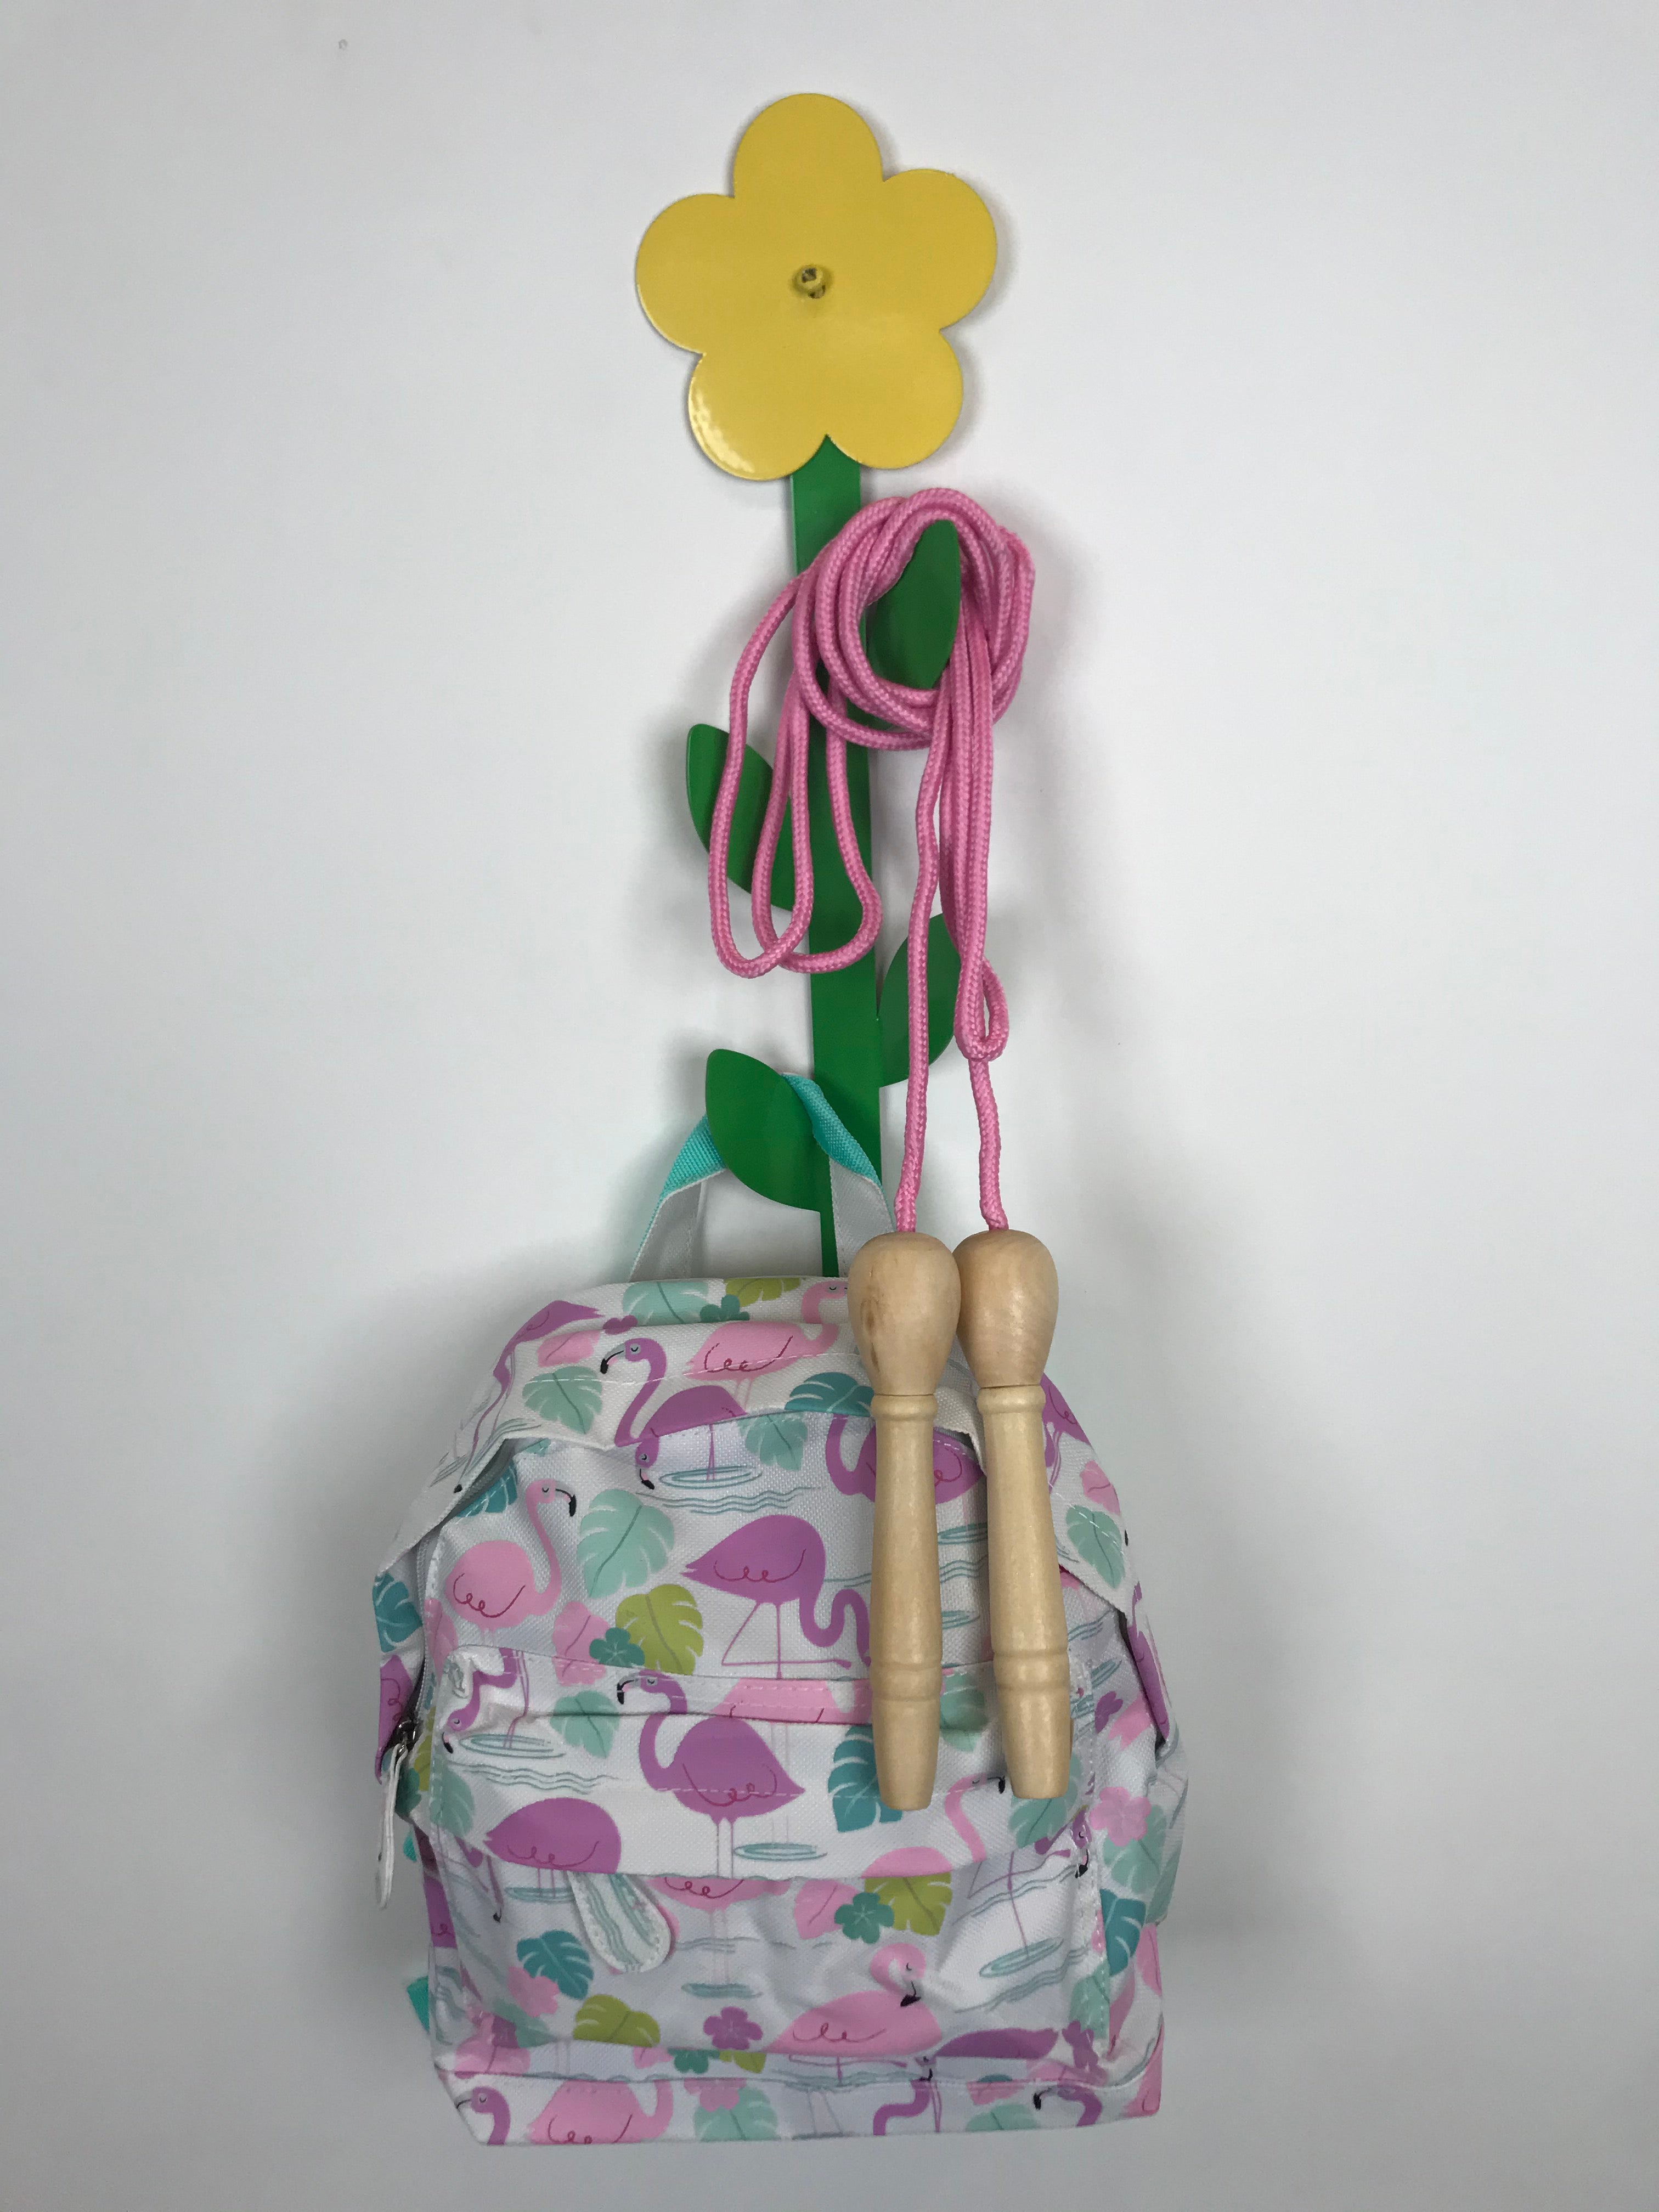 Flower shaped coat holder with items dangling